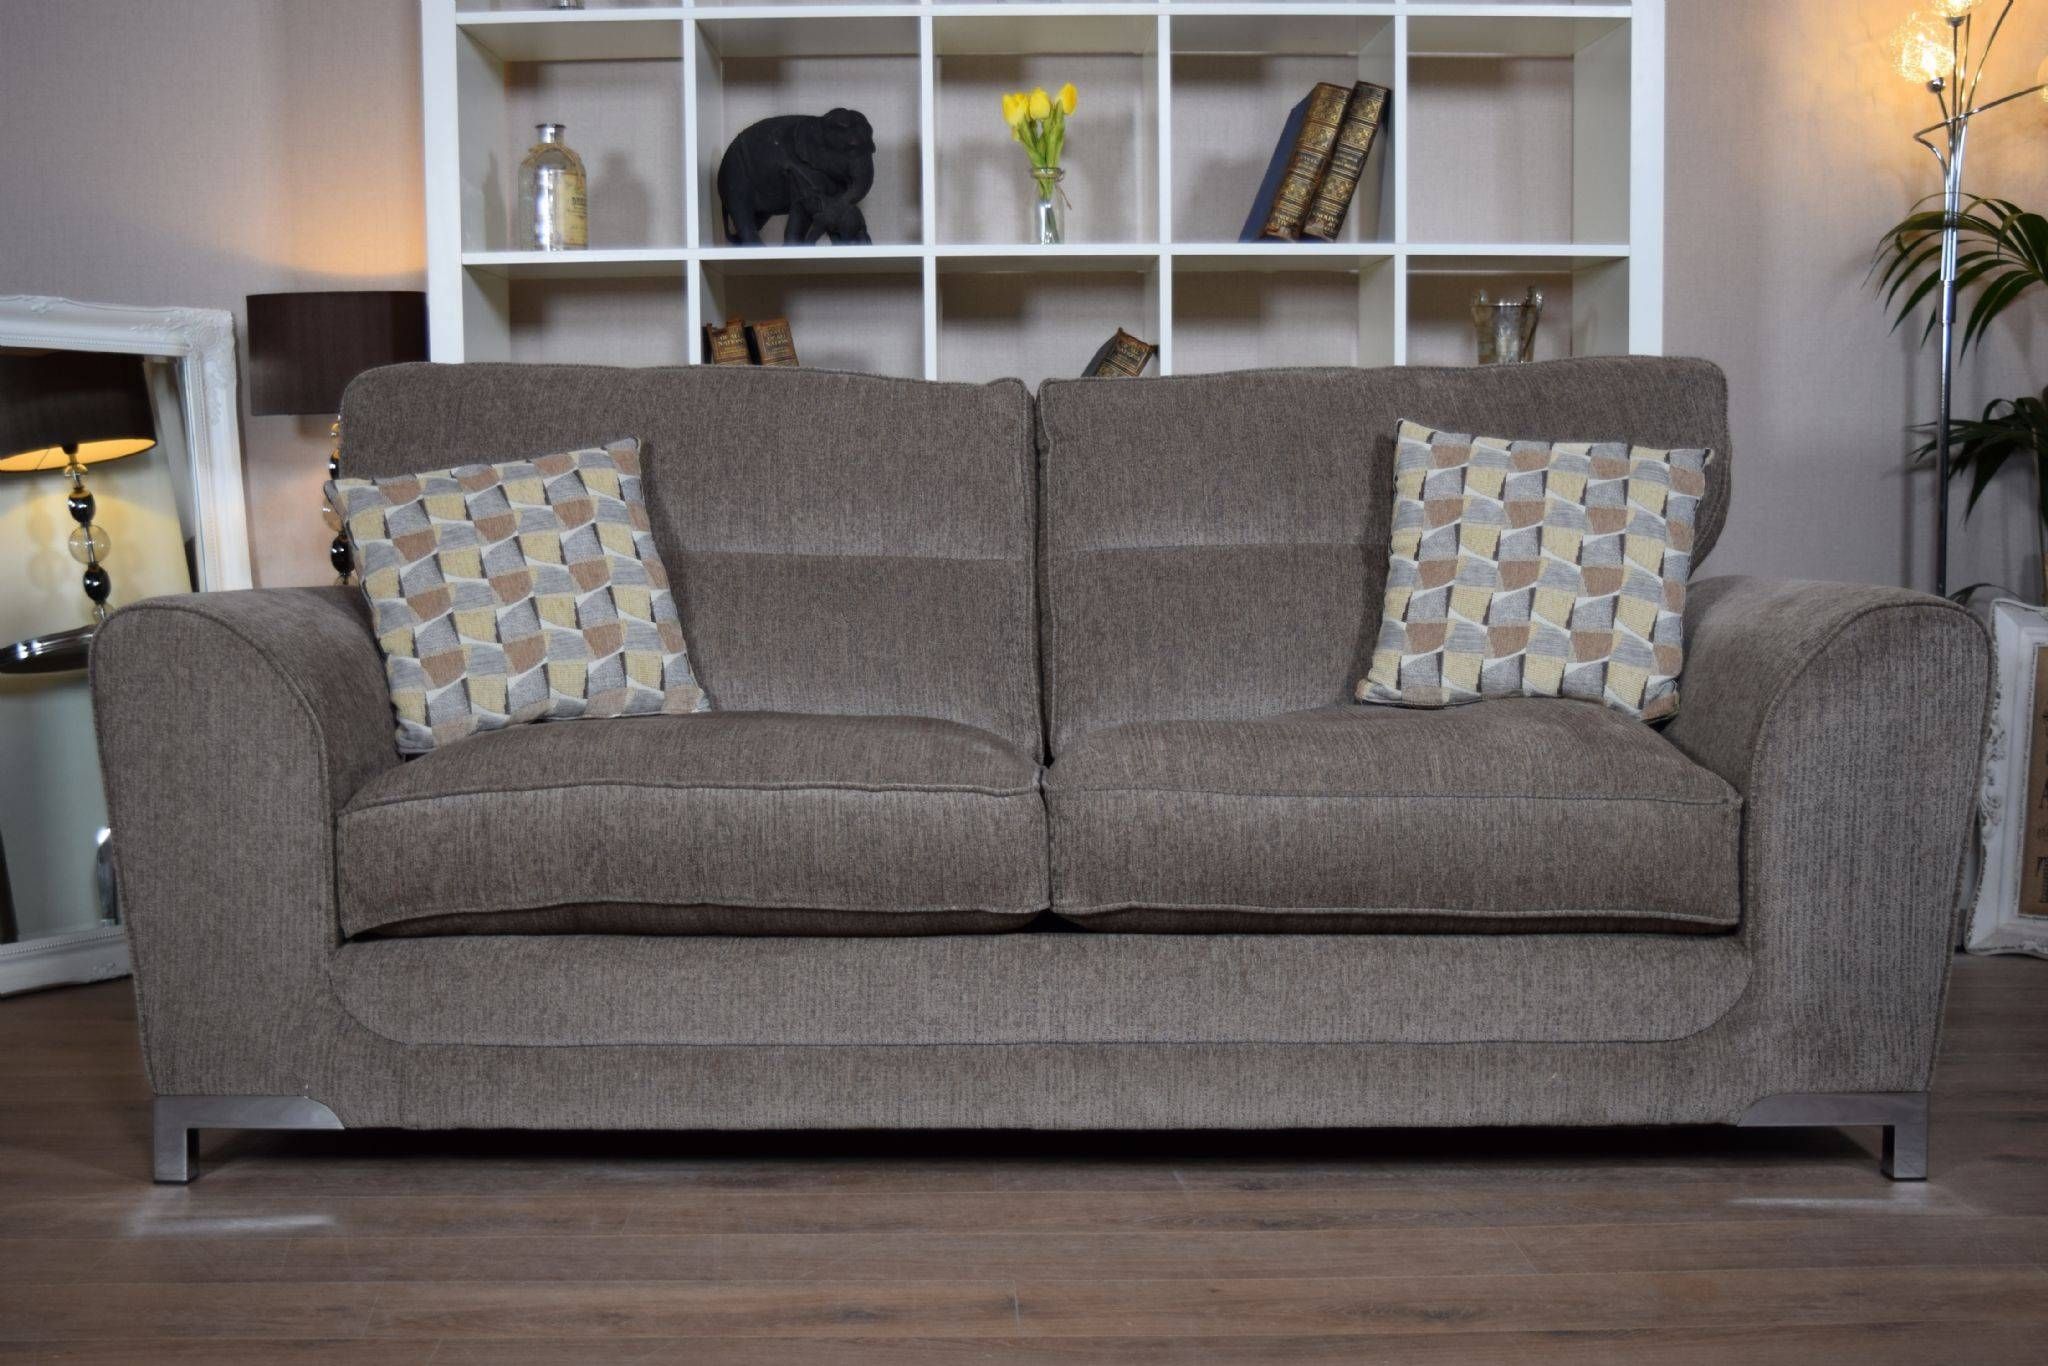 Set Nikki 3 Seater Sofa & Cuddle Chair Suite Set – Mocha Grey Throughout 3 Seater Sofa And Cuddle Chairs (Photo 203 of 299)